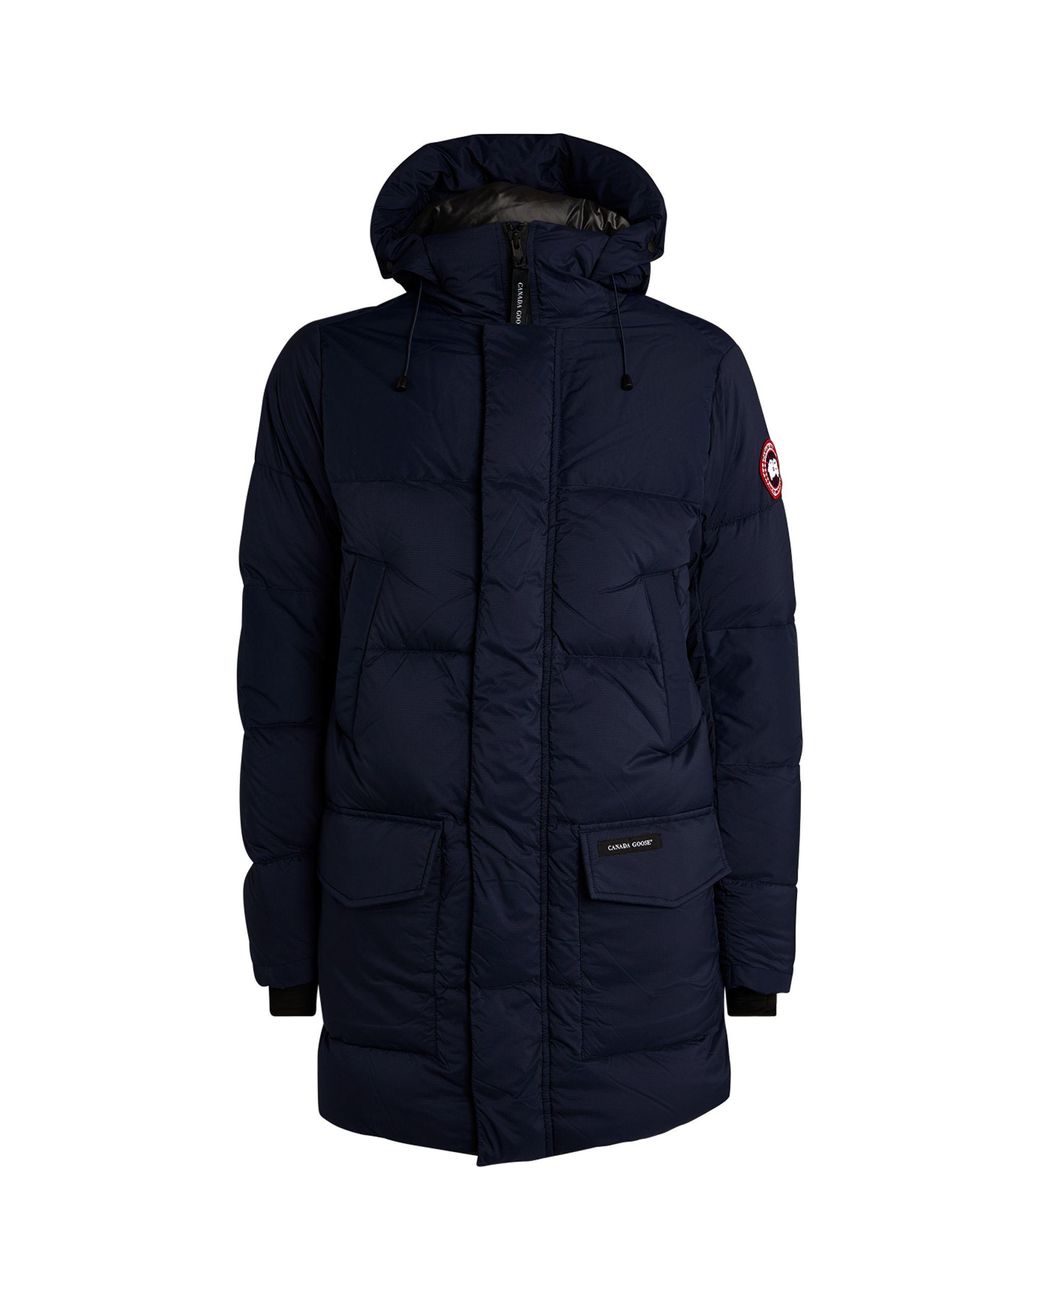 Canada Goose Synthetic Armstrong Hooded Jacket in Blue for Men - Lyst